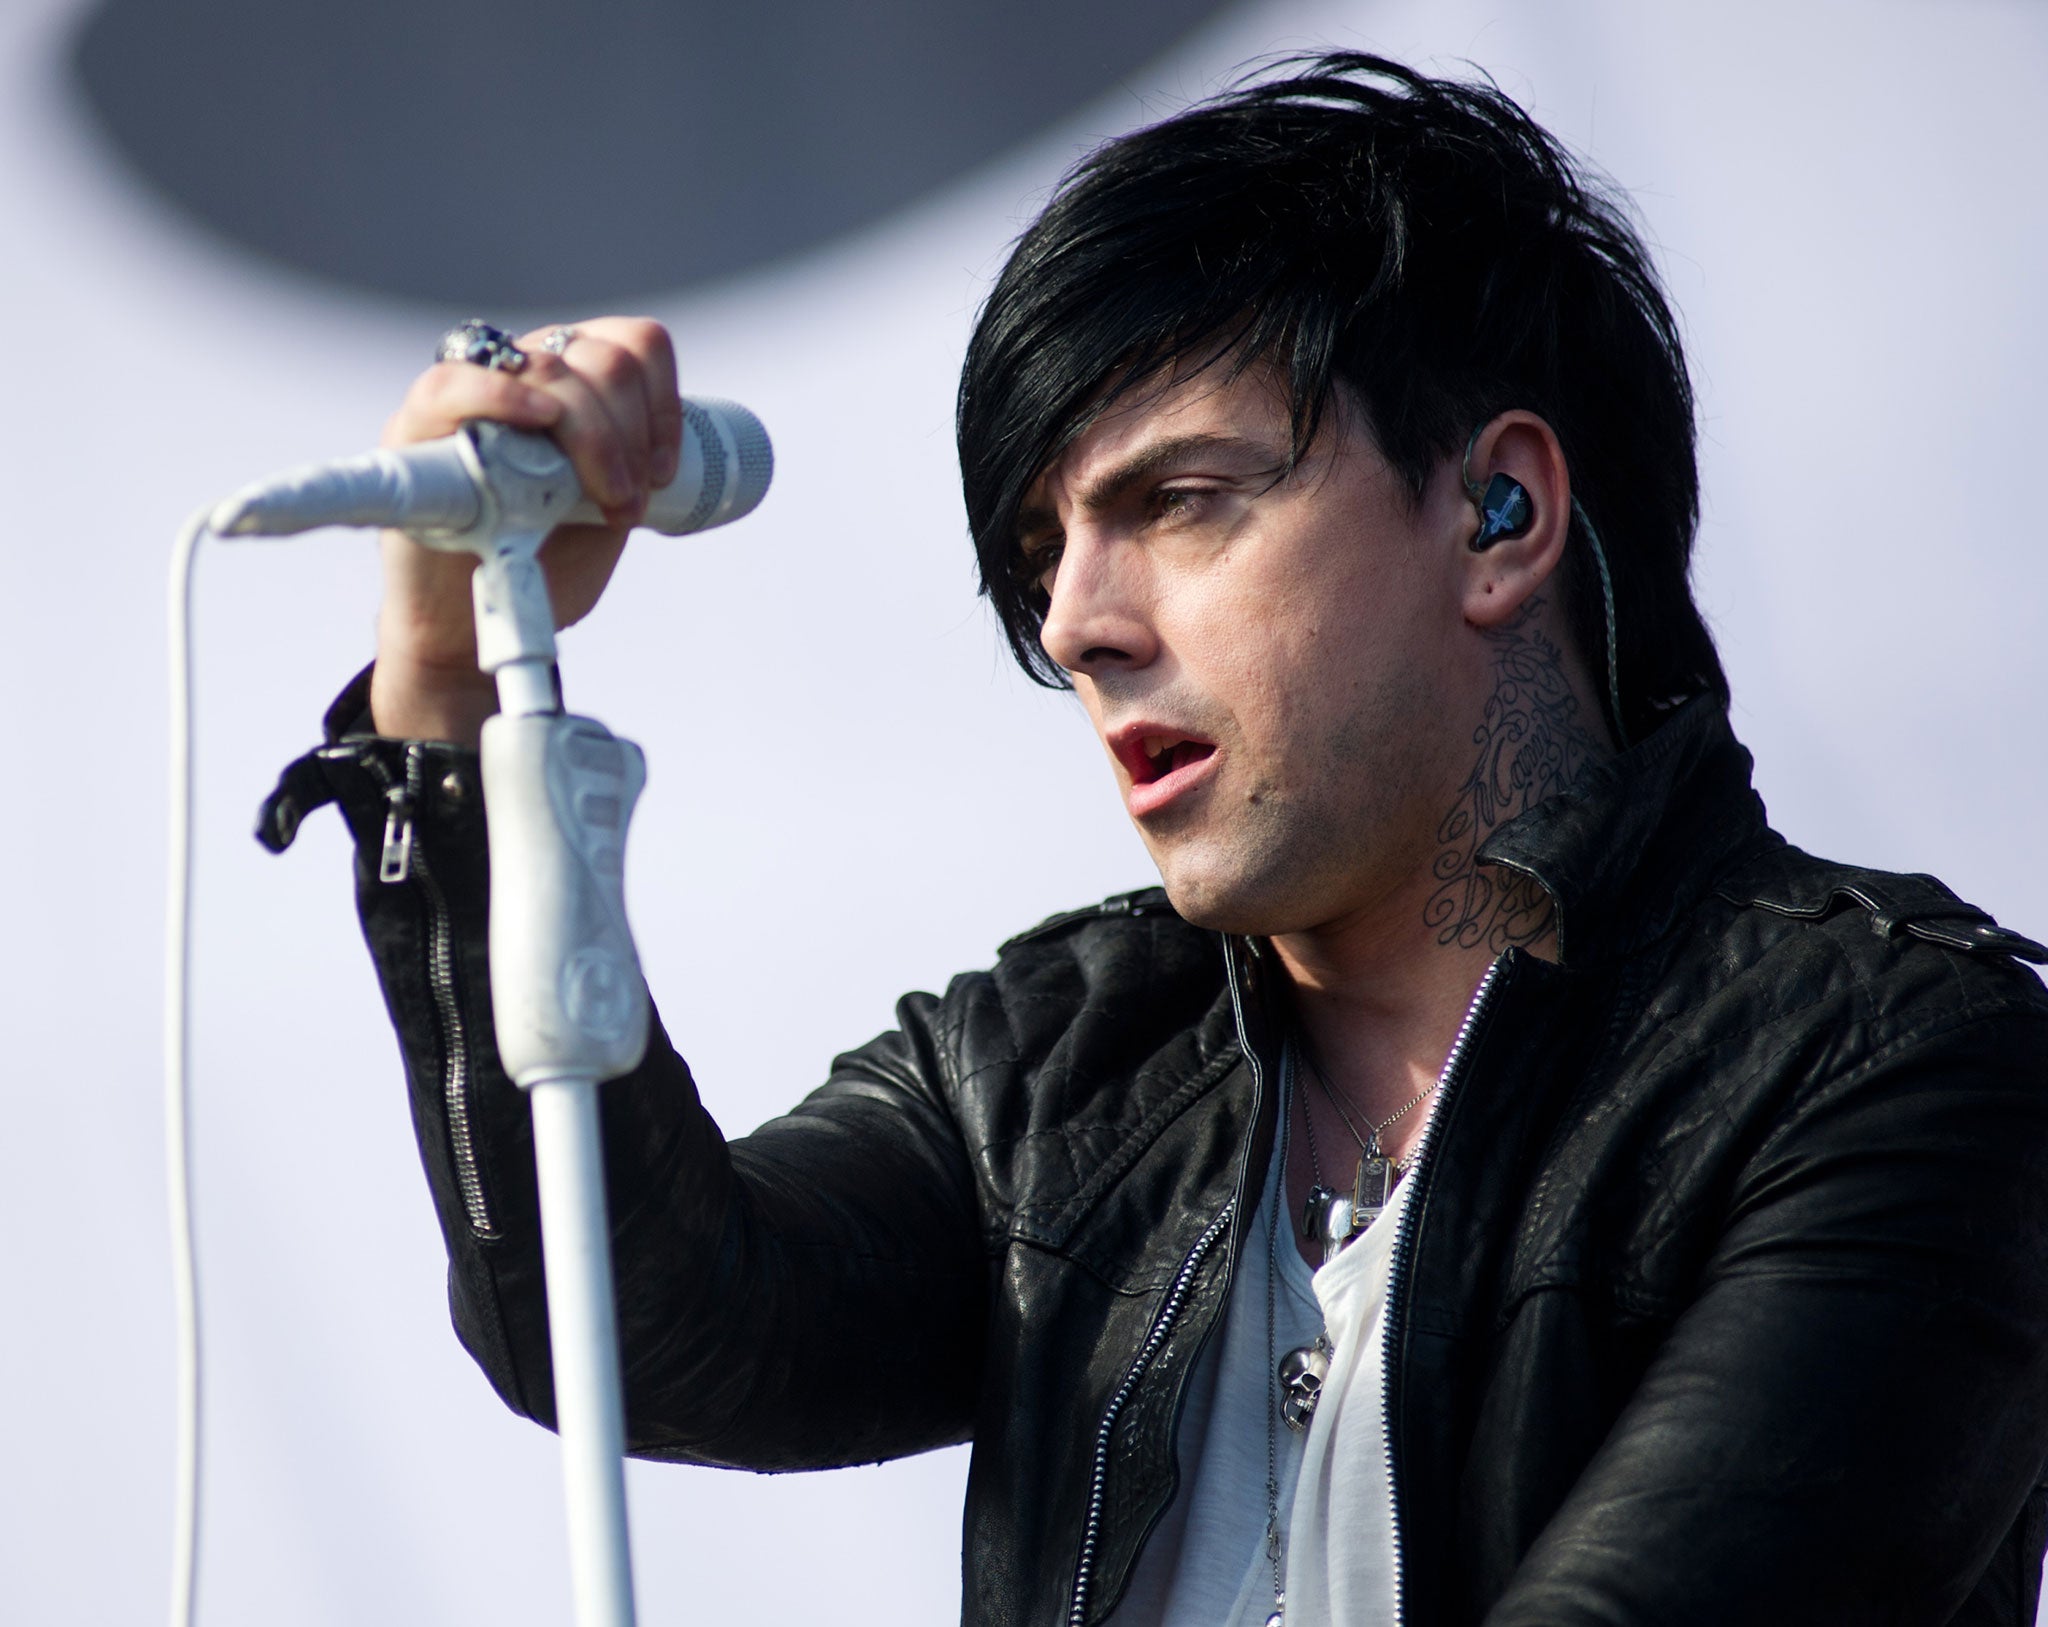 Ian Watkins Ex-girlfriend and former Lostprophets bandmates break silence on jailed singer after child sex abuse conviction The Independent The Independent